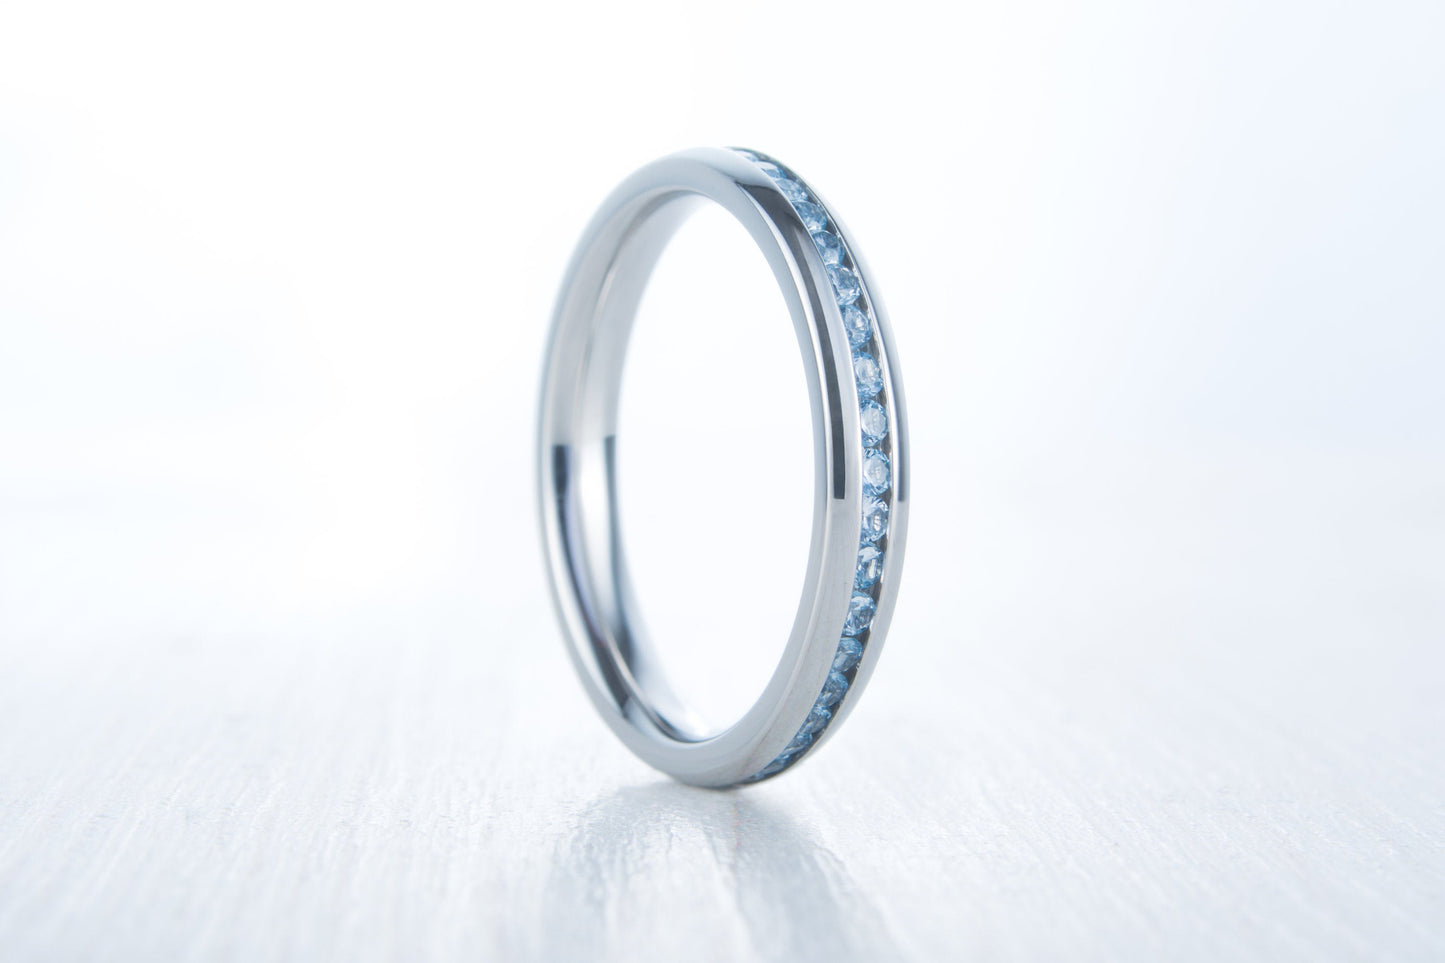 Natural Aquamarine 3mm Wide Full Eternity ring / stacking ring in white gold or titanium - Wedding Band - Engagement ring